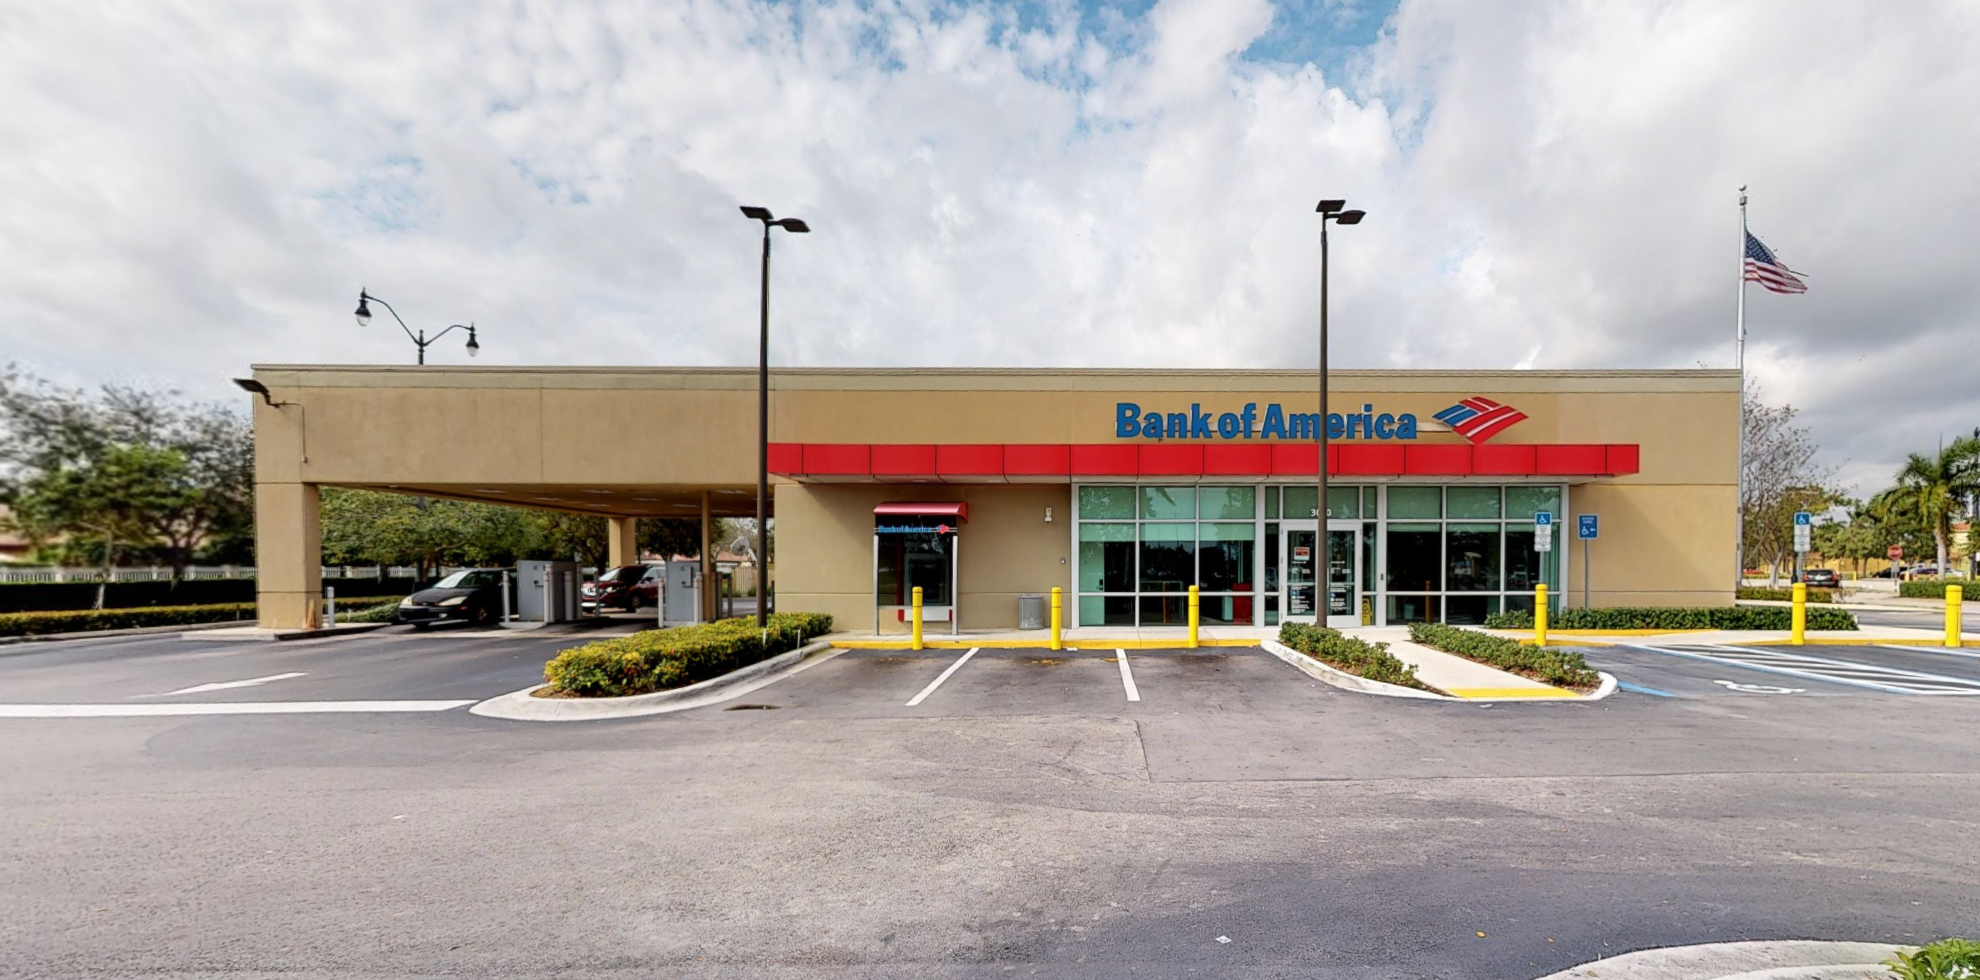 Bank of America financial center with drive-thru ATM and teller | 3050 NE 43rd Ave, Homestead, FL 33033